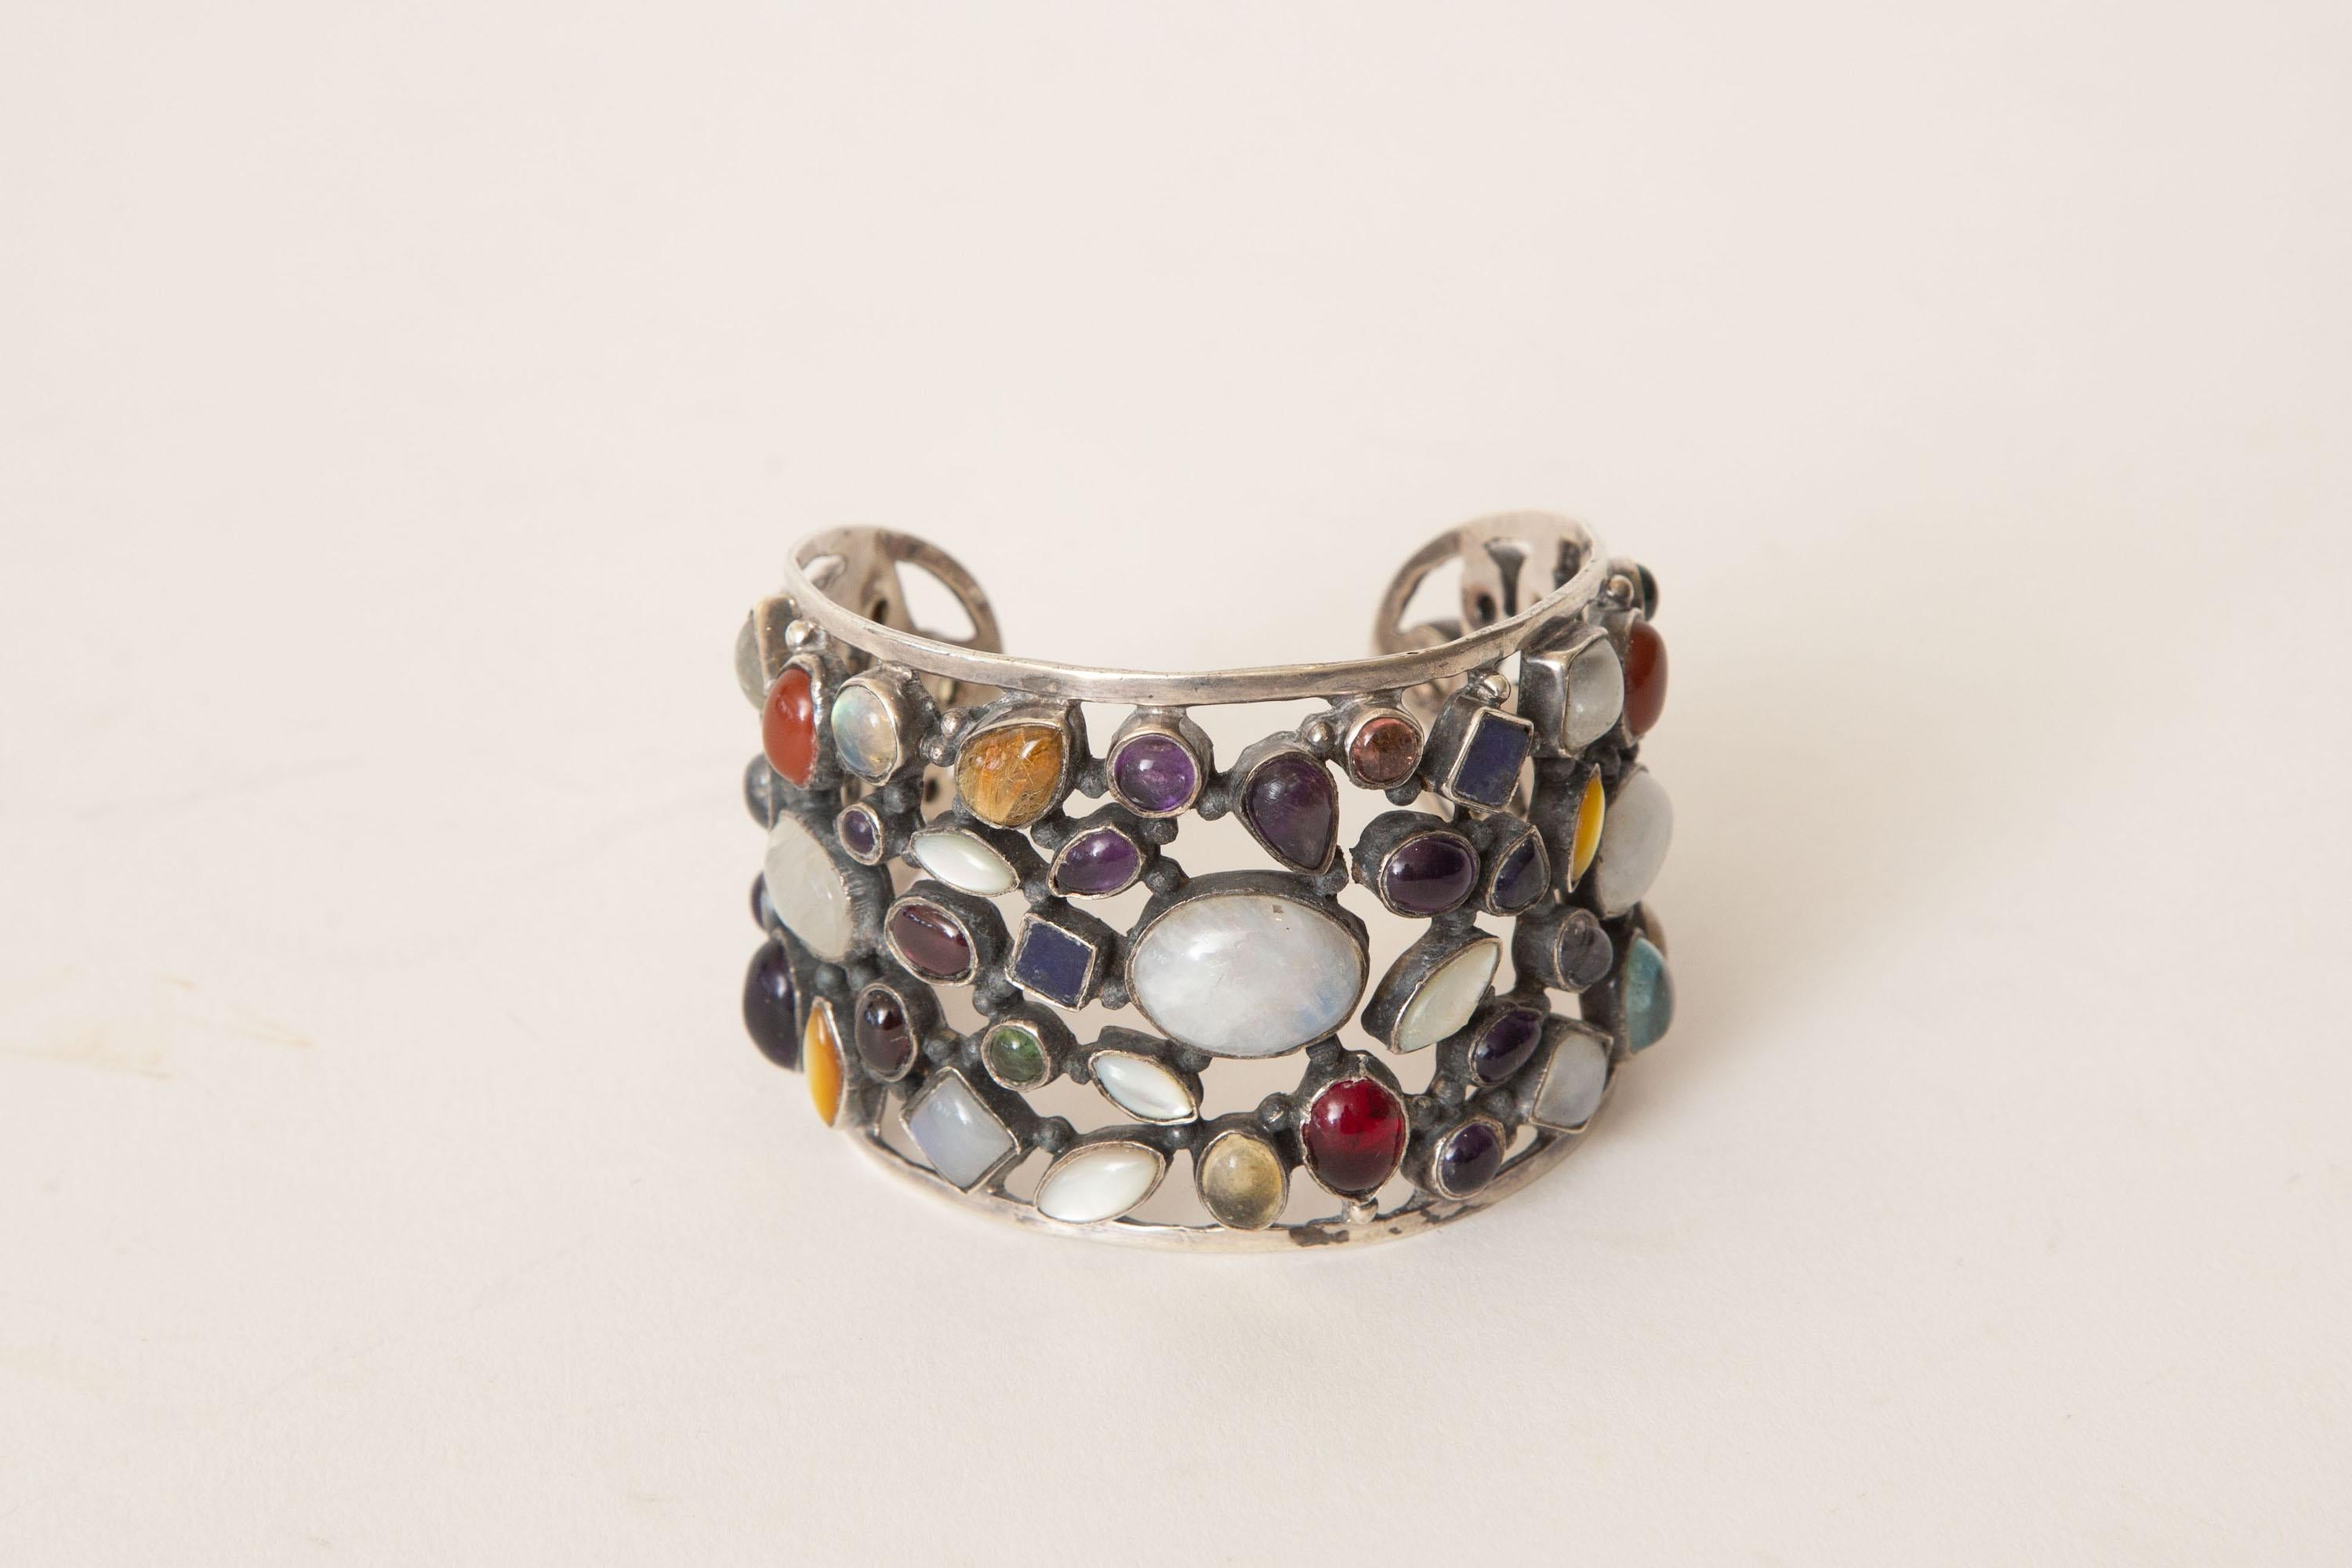 This stunning cuff bracelet all hand wrought is a beautiful combinations of gorgeous set semi precious stones in different shapes and colors.They are set against sterling silver filigree. Opal, Garnet and Amethyst, are just a few of the stones.